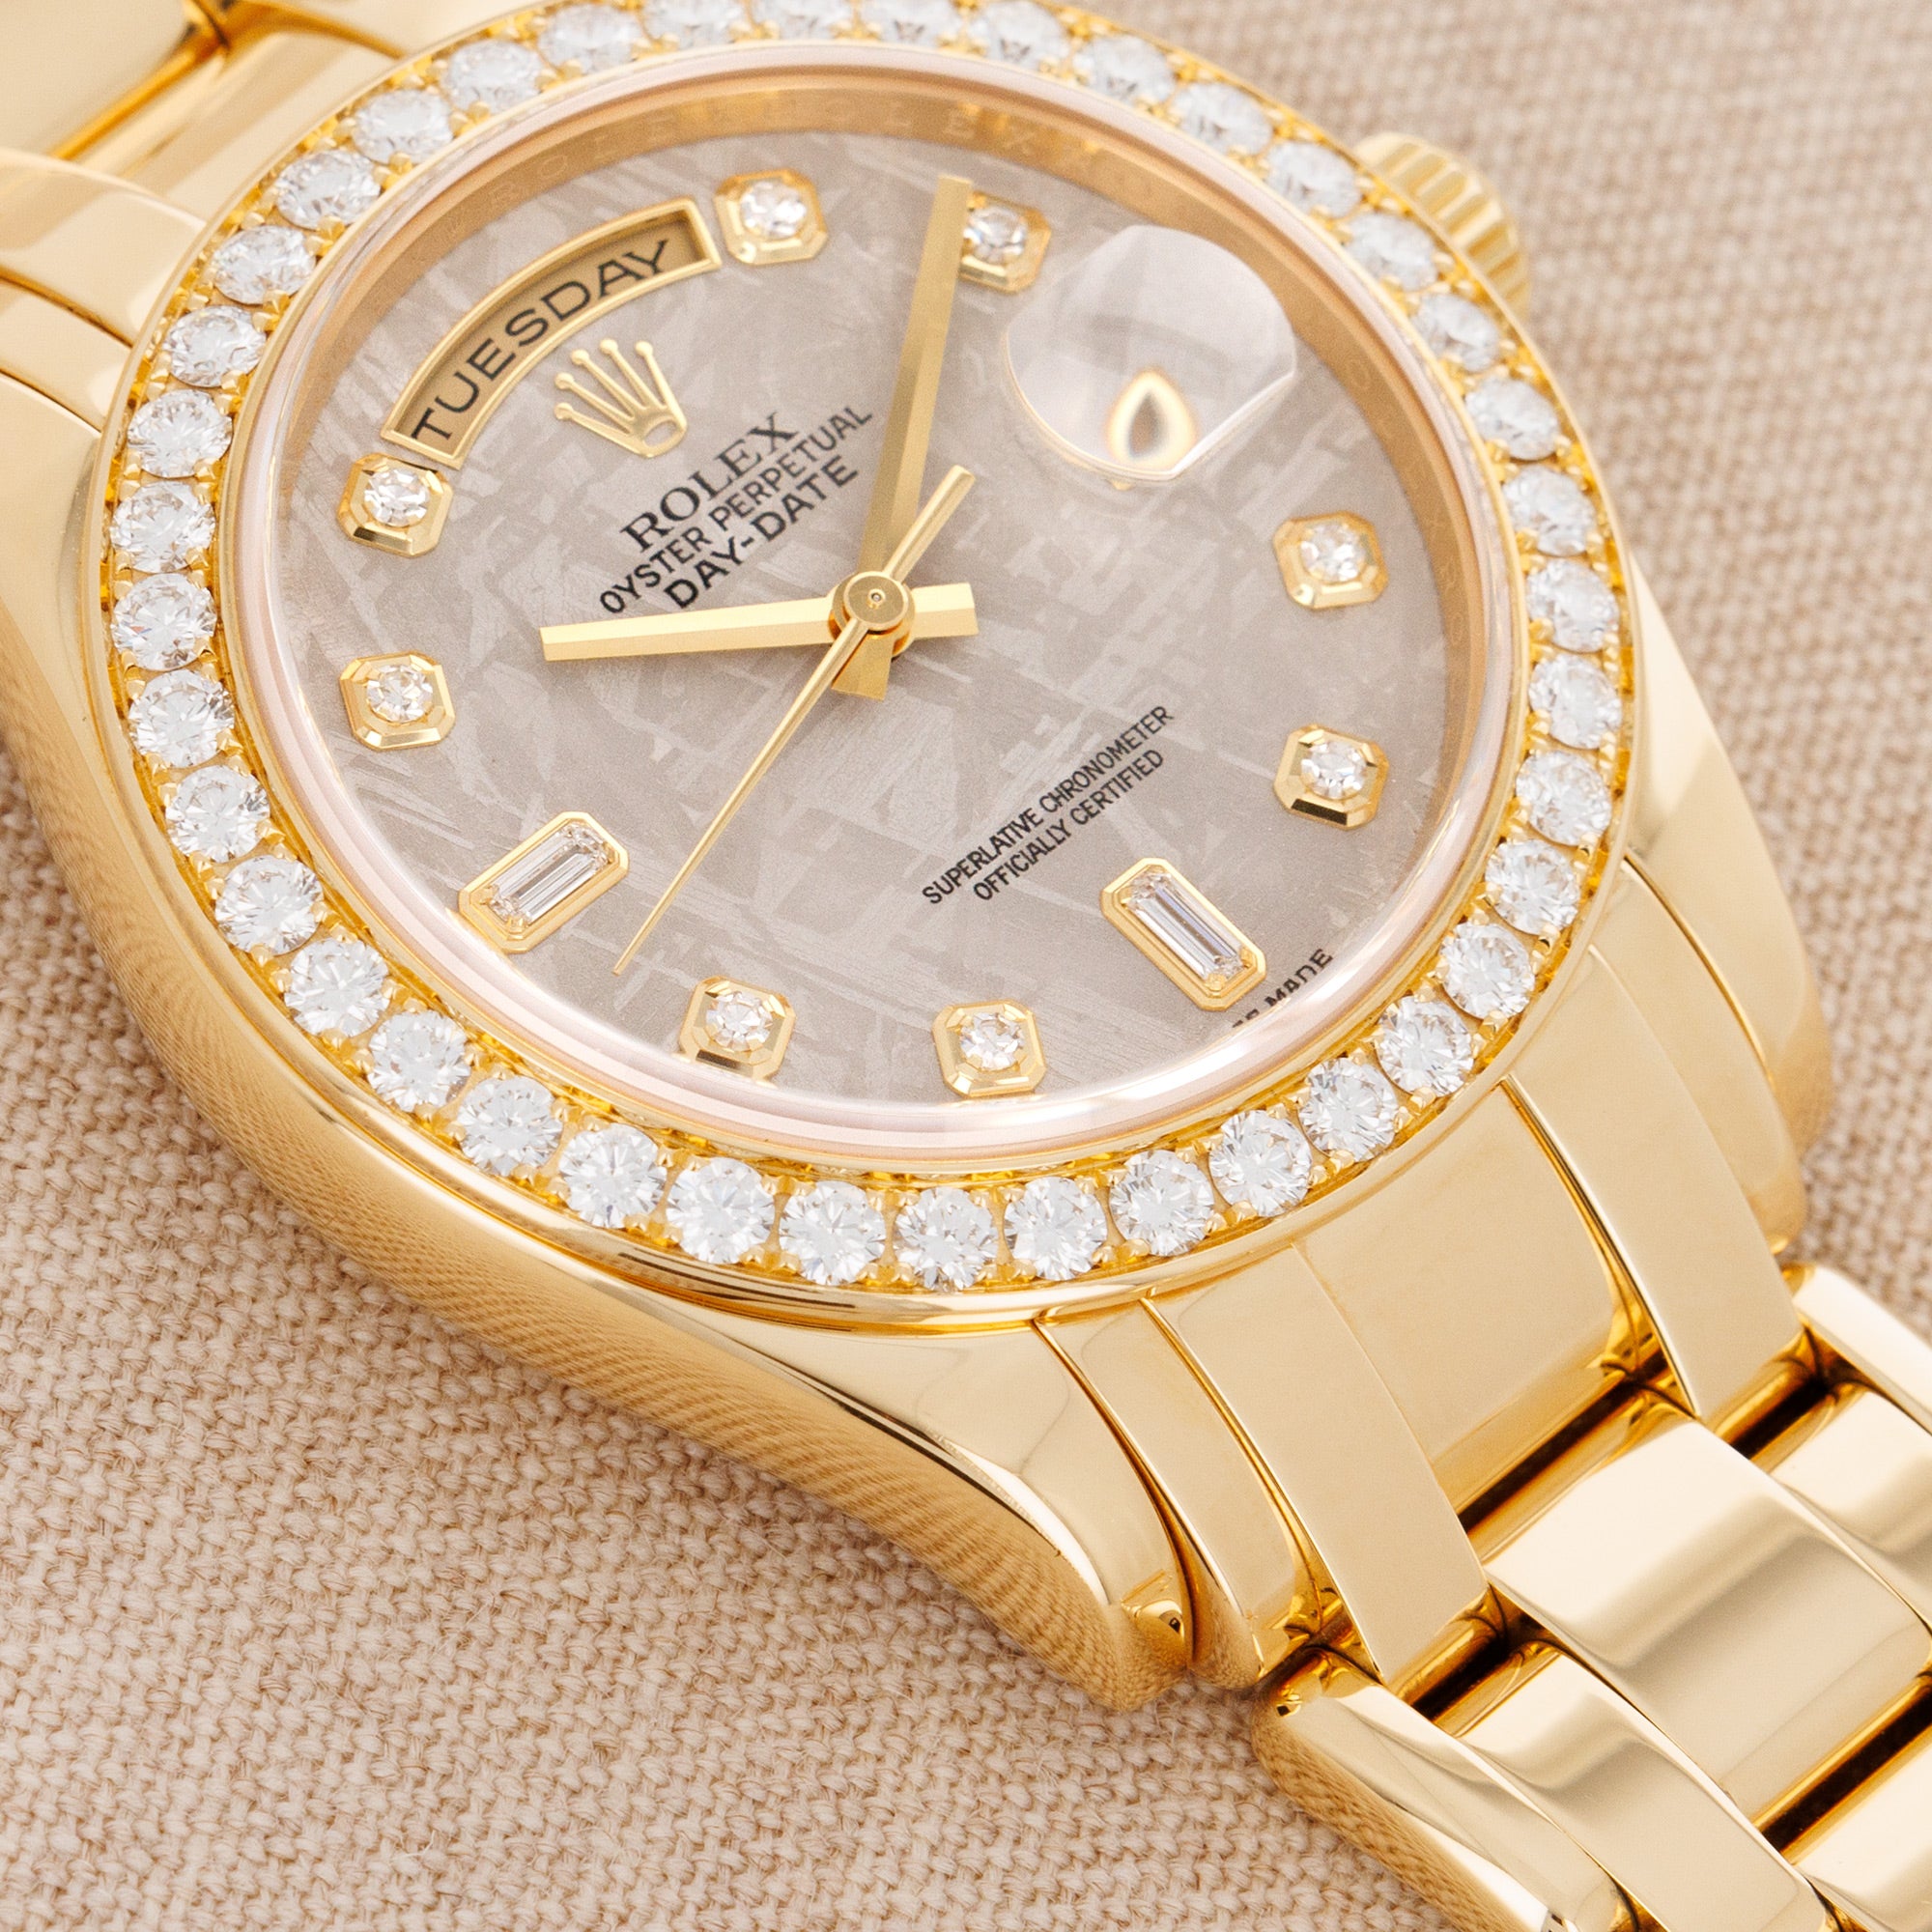 Rolex Yellow Gold Masterpiece Ref. 18948 with Meteorite Dial